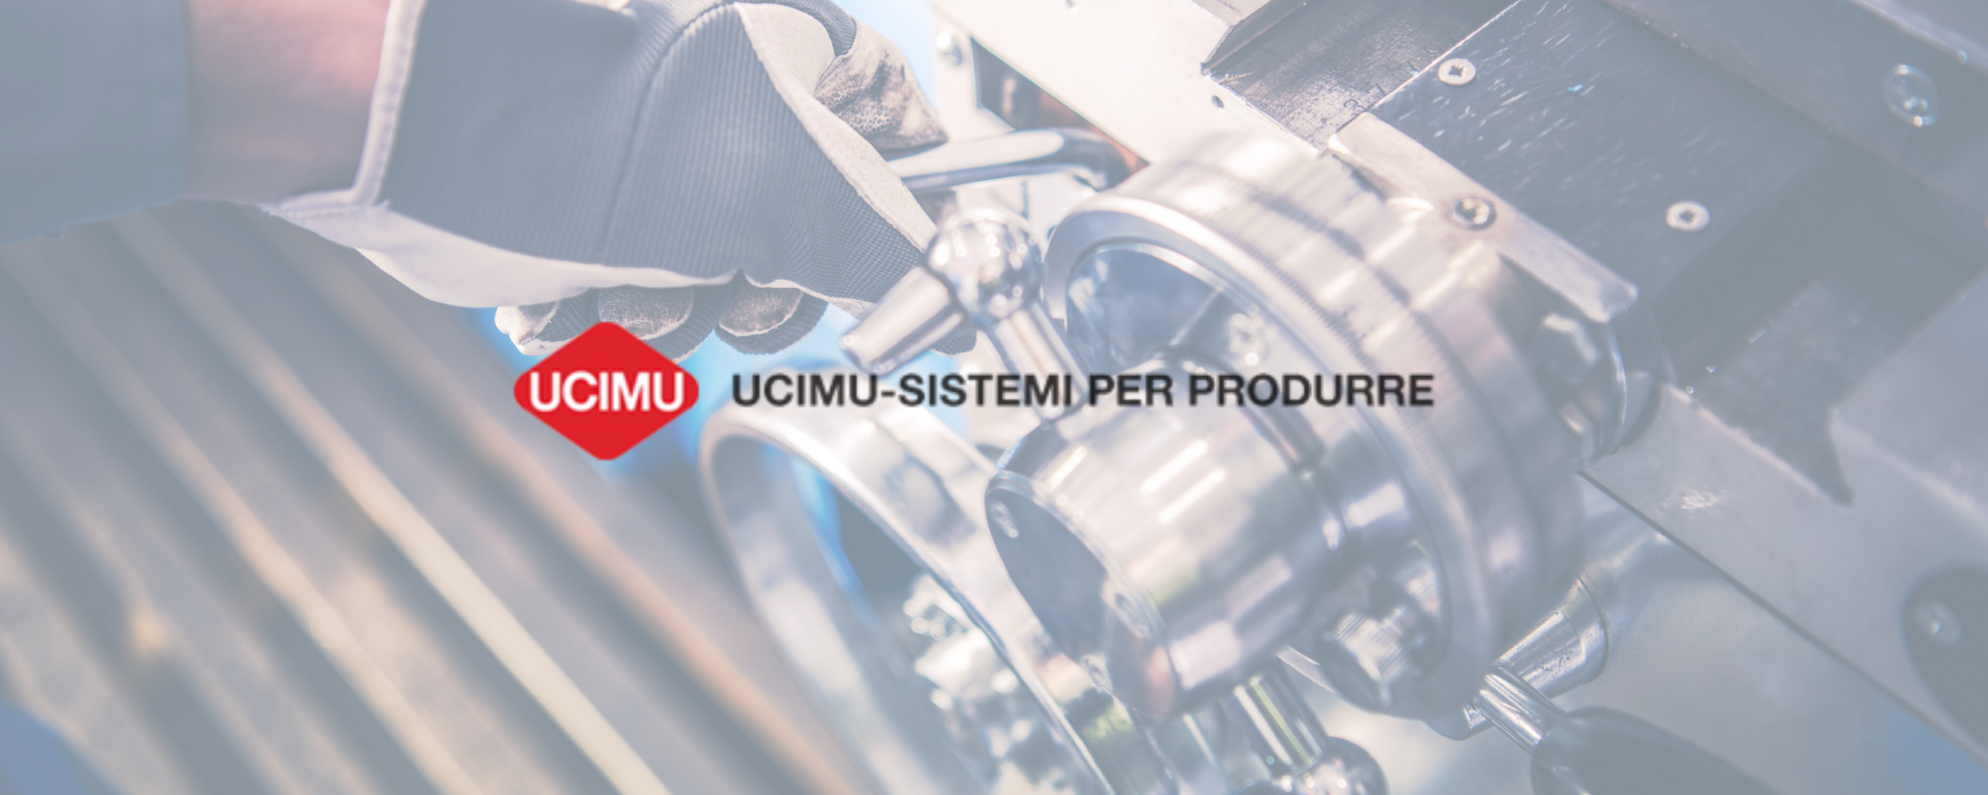 UCIMU meeting: an excellent 2022 for the Italian machine tool industry. 2023 still positive, but the order intake slows down